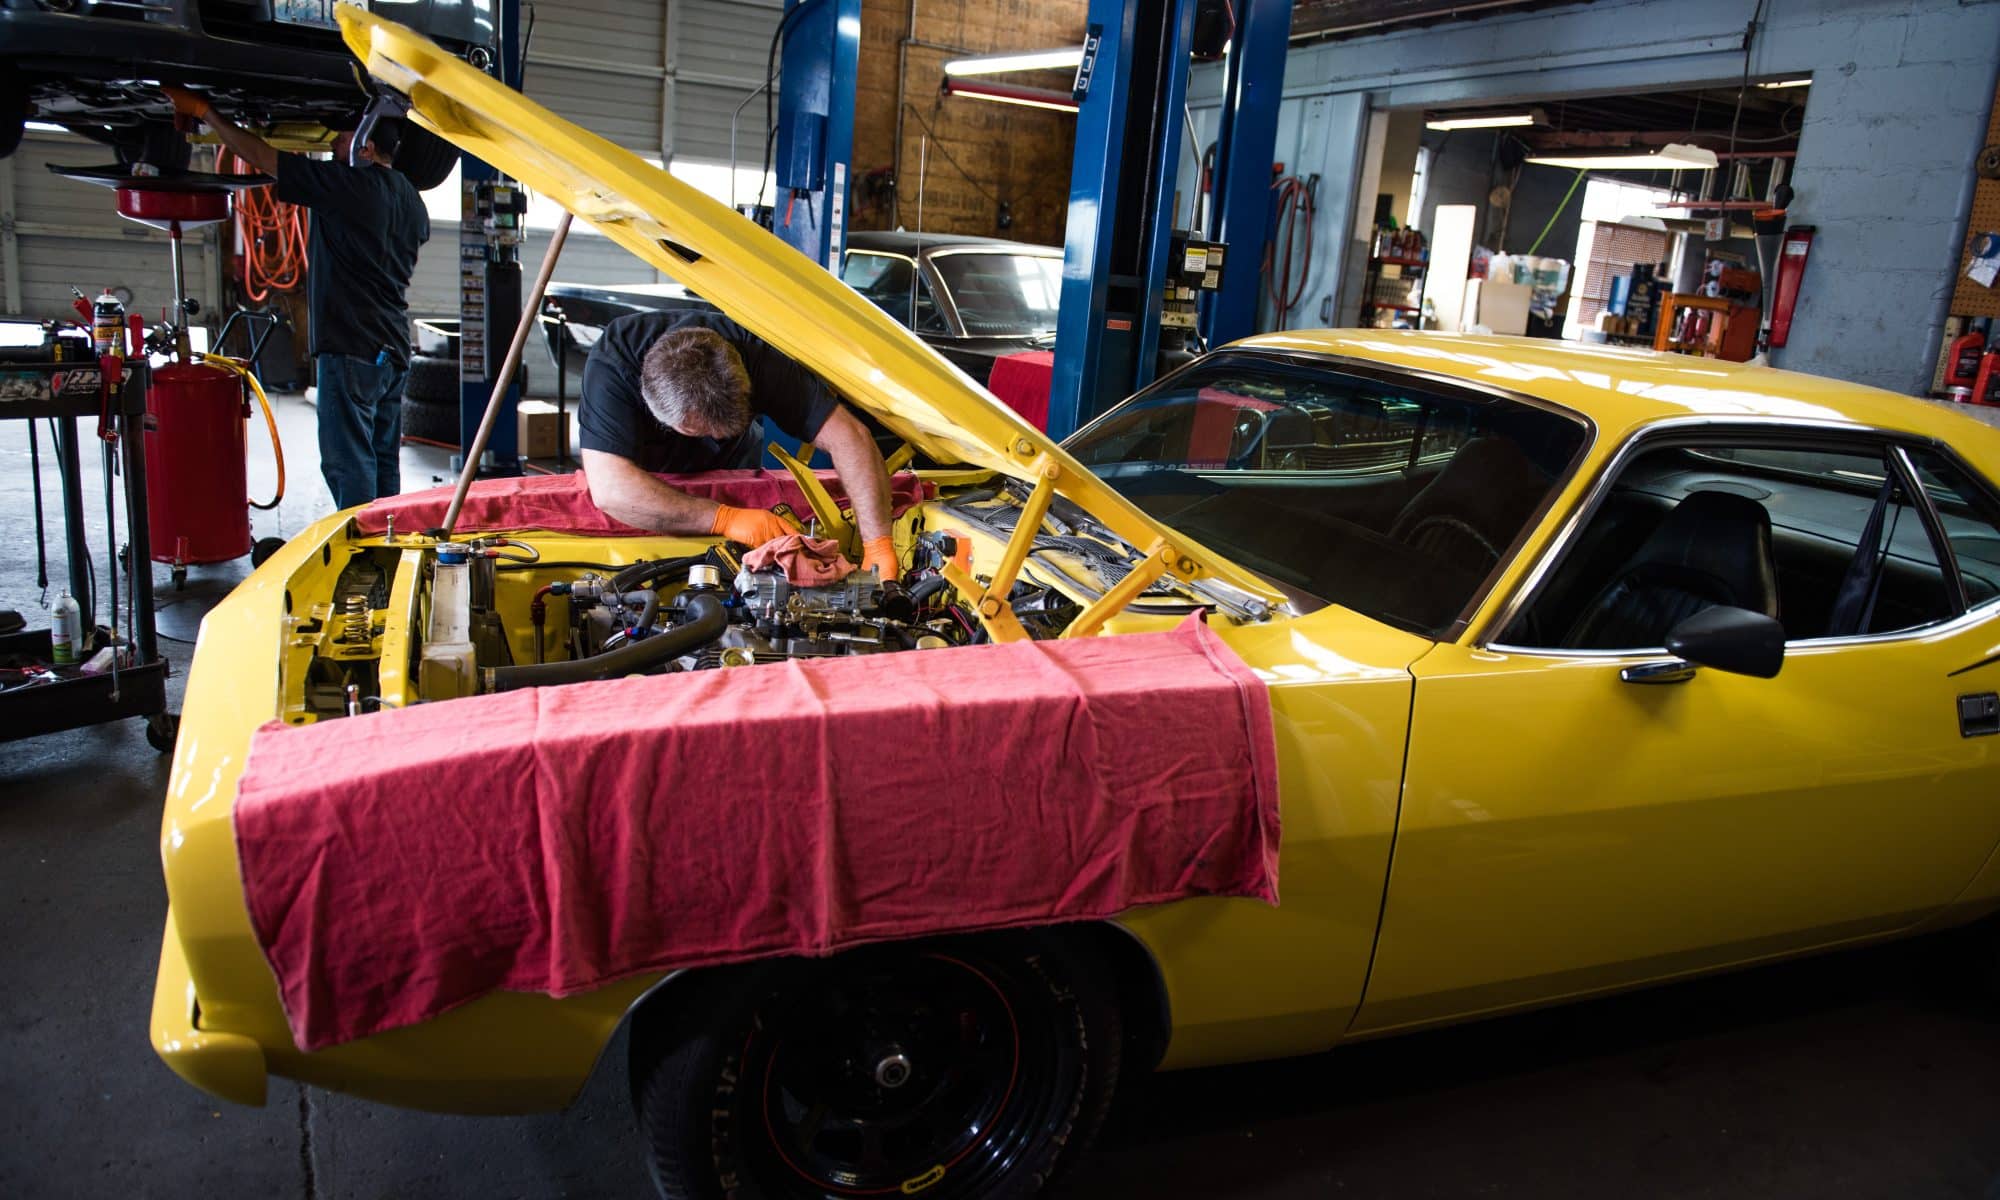 An automotive tech works on a yellow car in a garage.